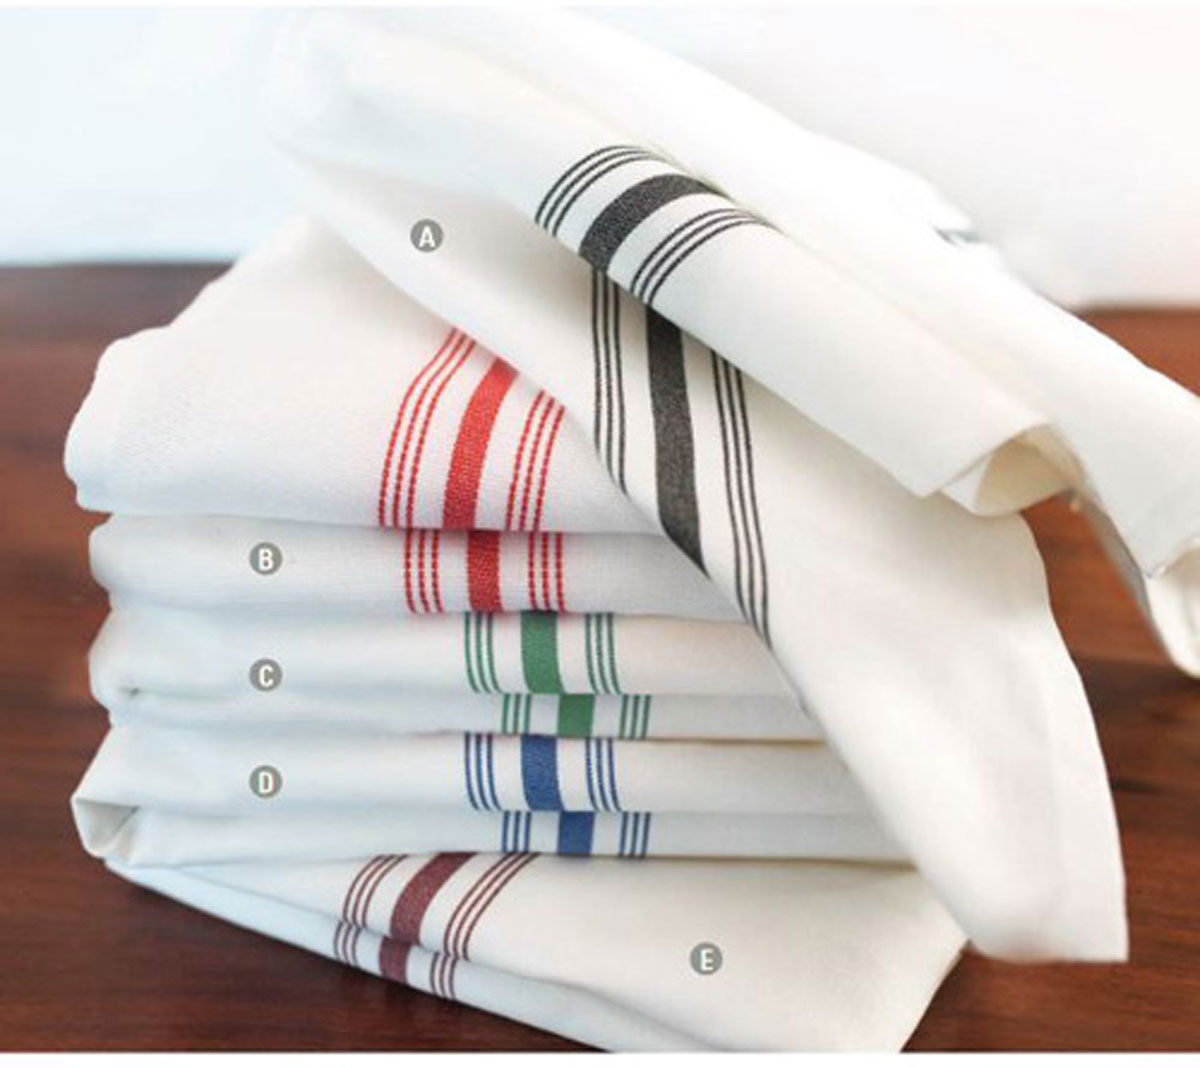 Are these bistro napkins suitable for bulk use in restaurants?